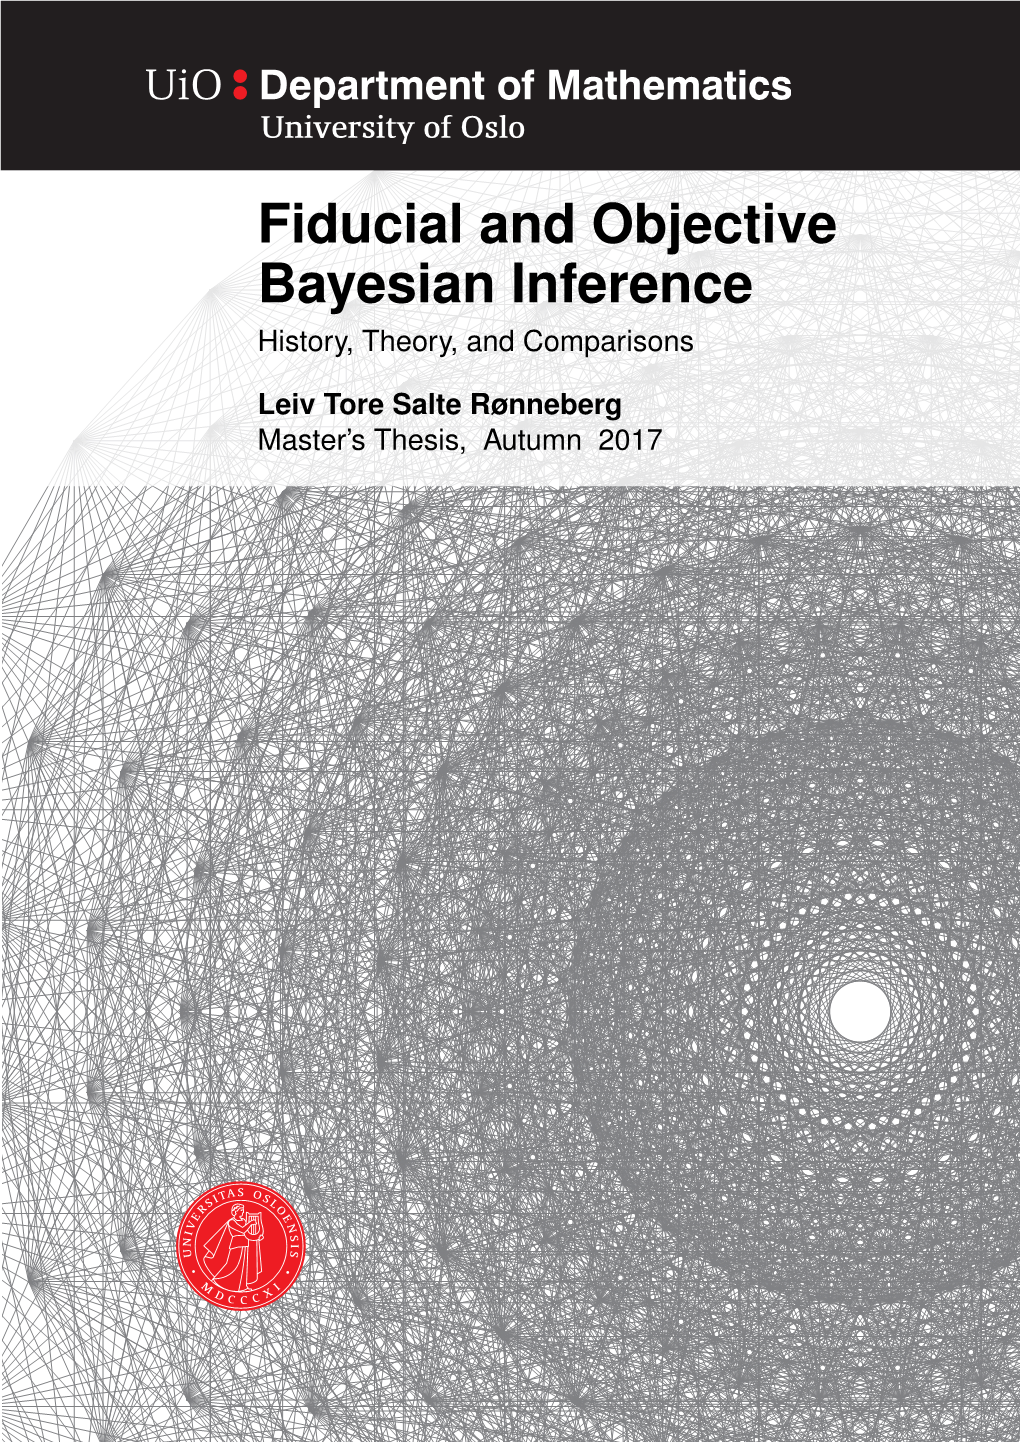 Fiducial and Objective Bayesian Inference History, Theory, and Comparisons